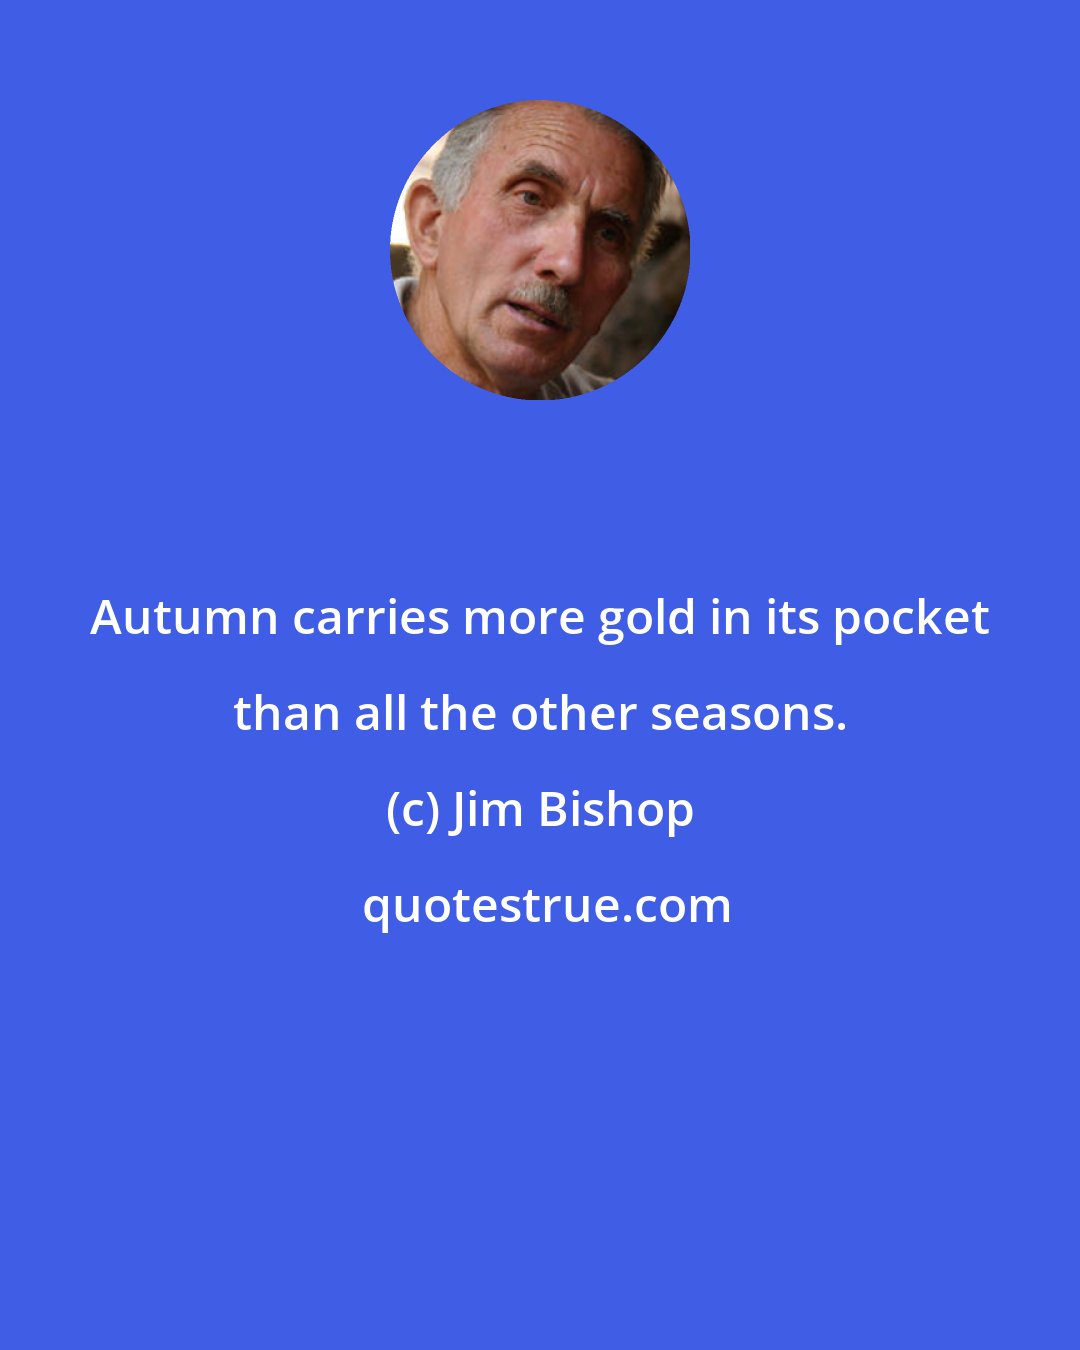 Jim Bishop: Autumn carries more gold in its pocket than all the other seasons.